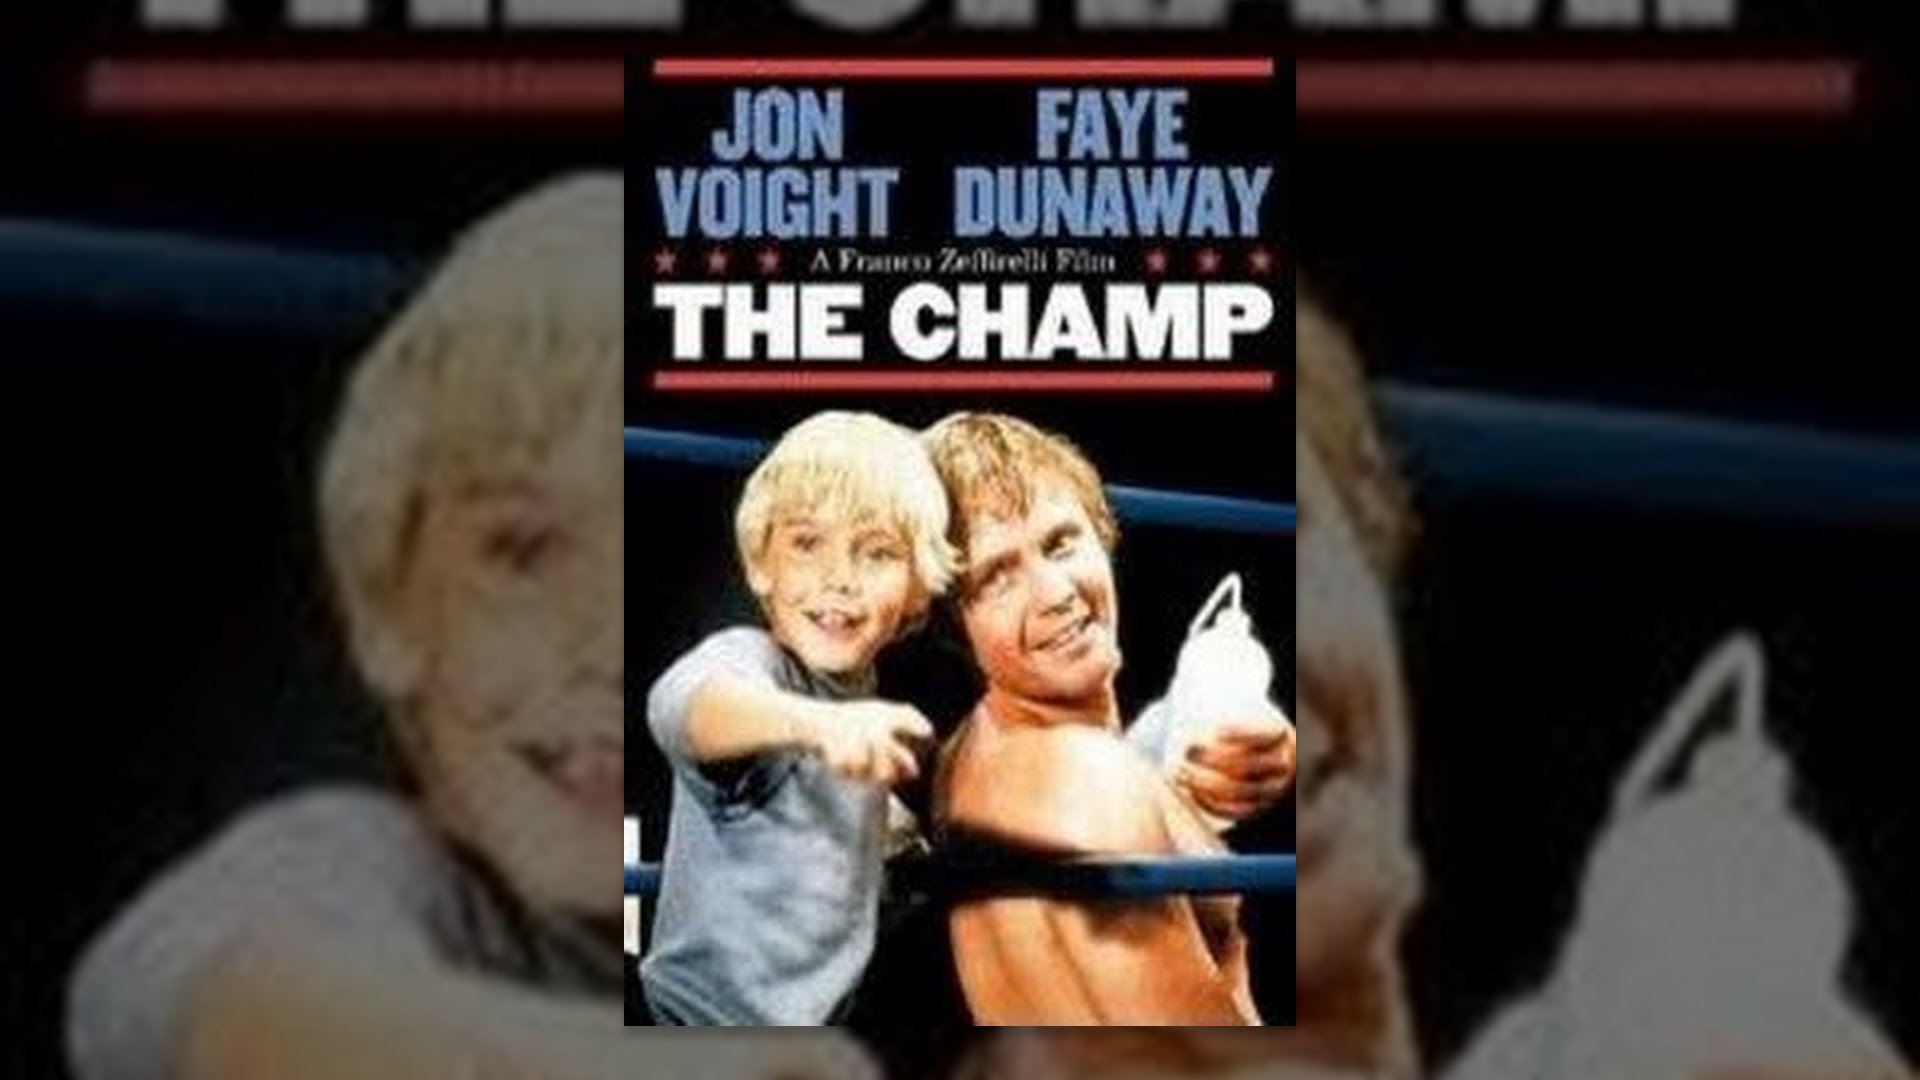 Where can I watch the Champ movie?